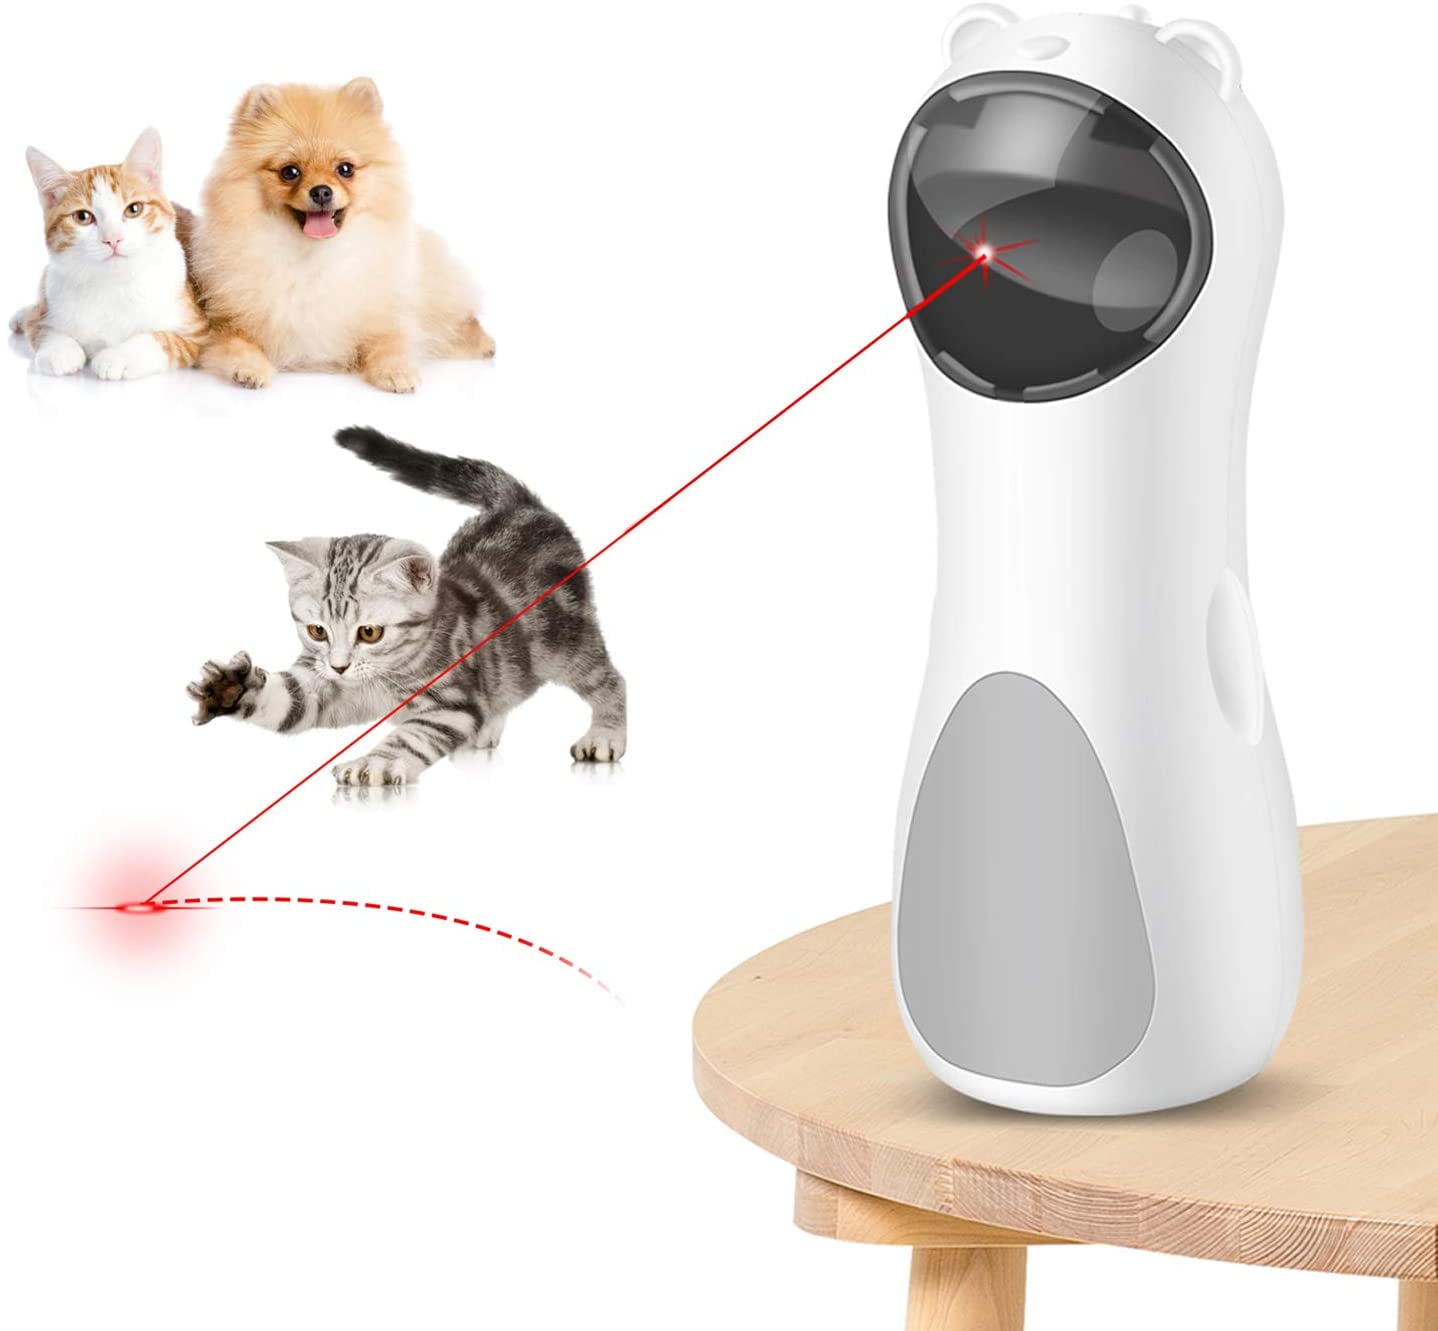 3 Mode 2 Pack with a Furry Mice 4 Pattern for Cat Dog Kitten Cat Toys Chase Pointer Light Toy Interactive USB Rechargeable Pet Training Exercise Tool 